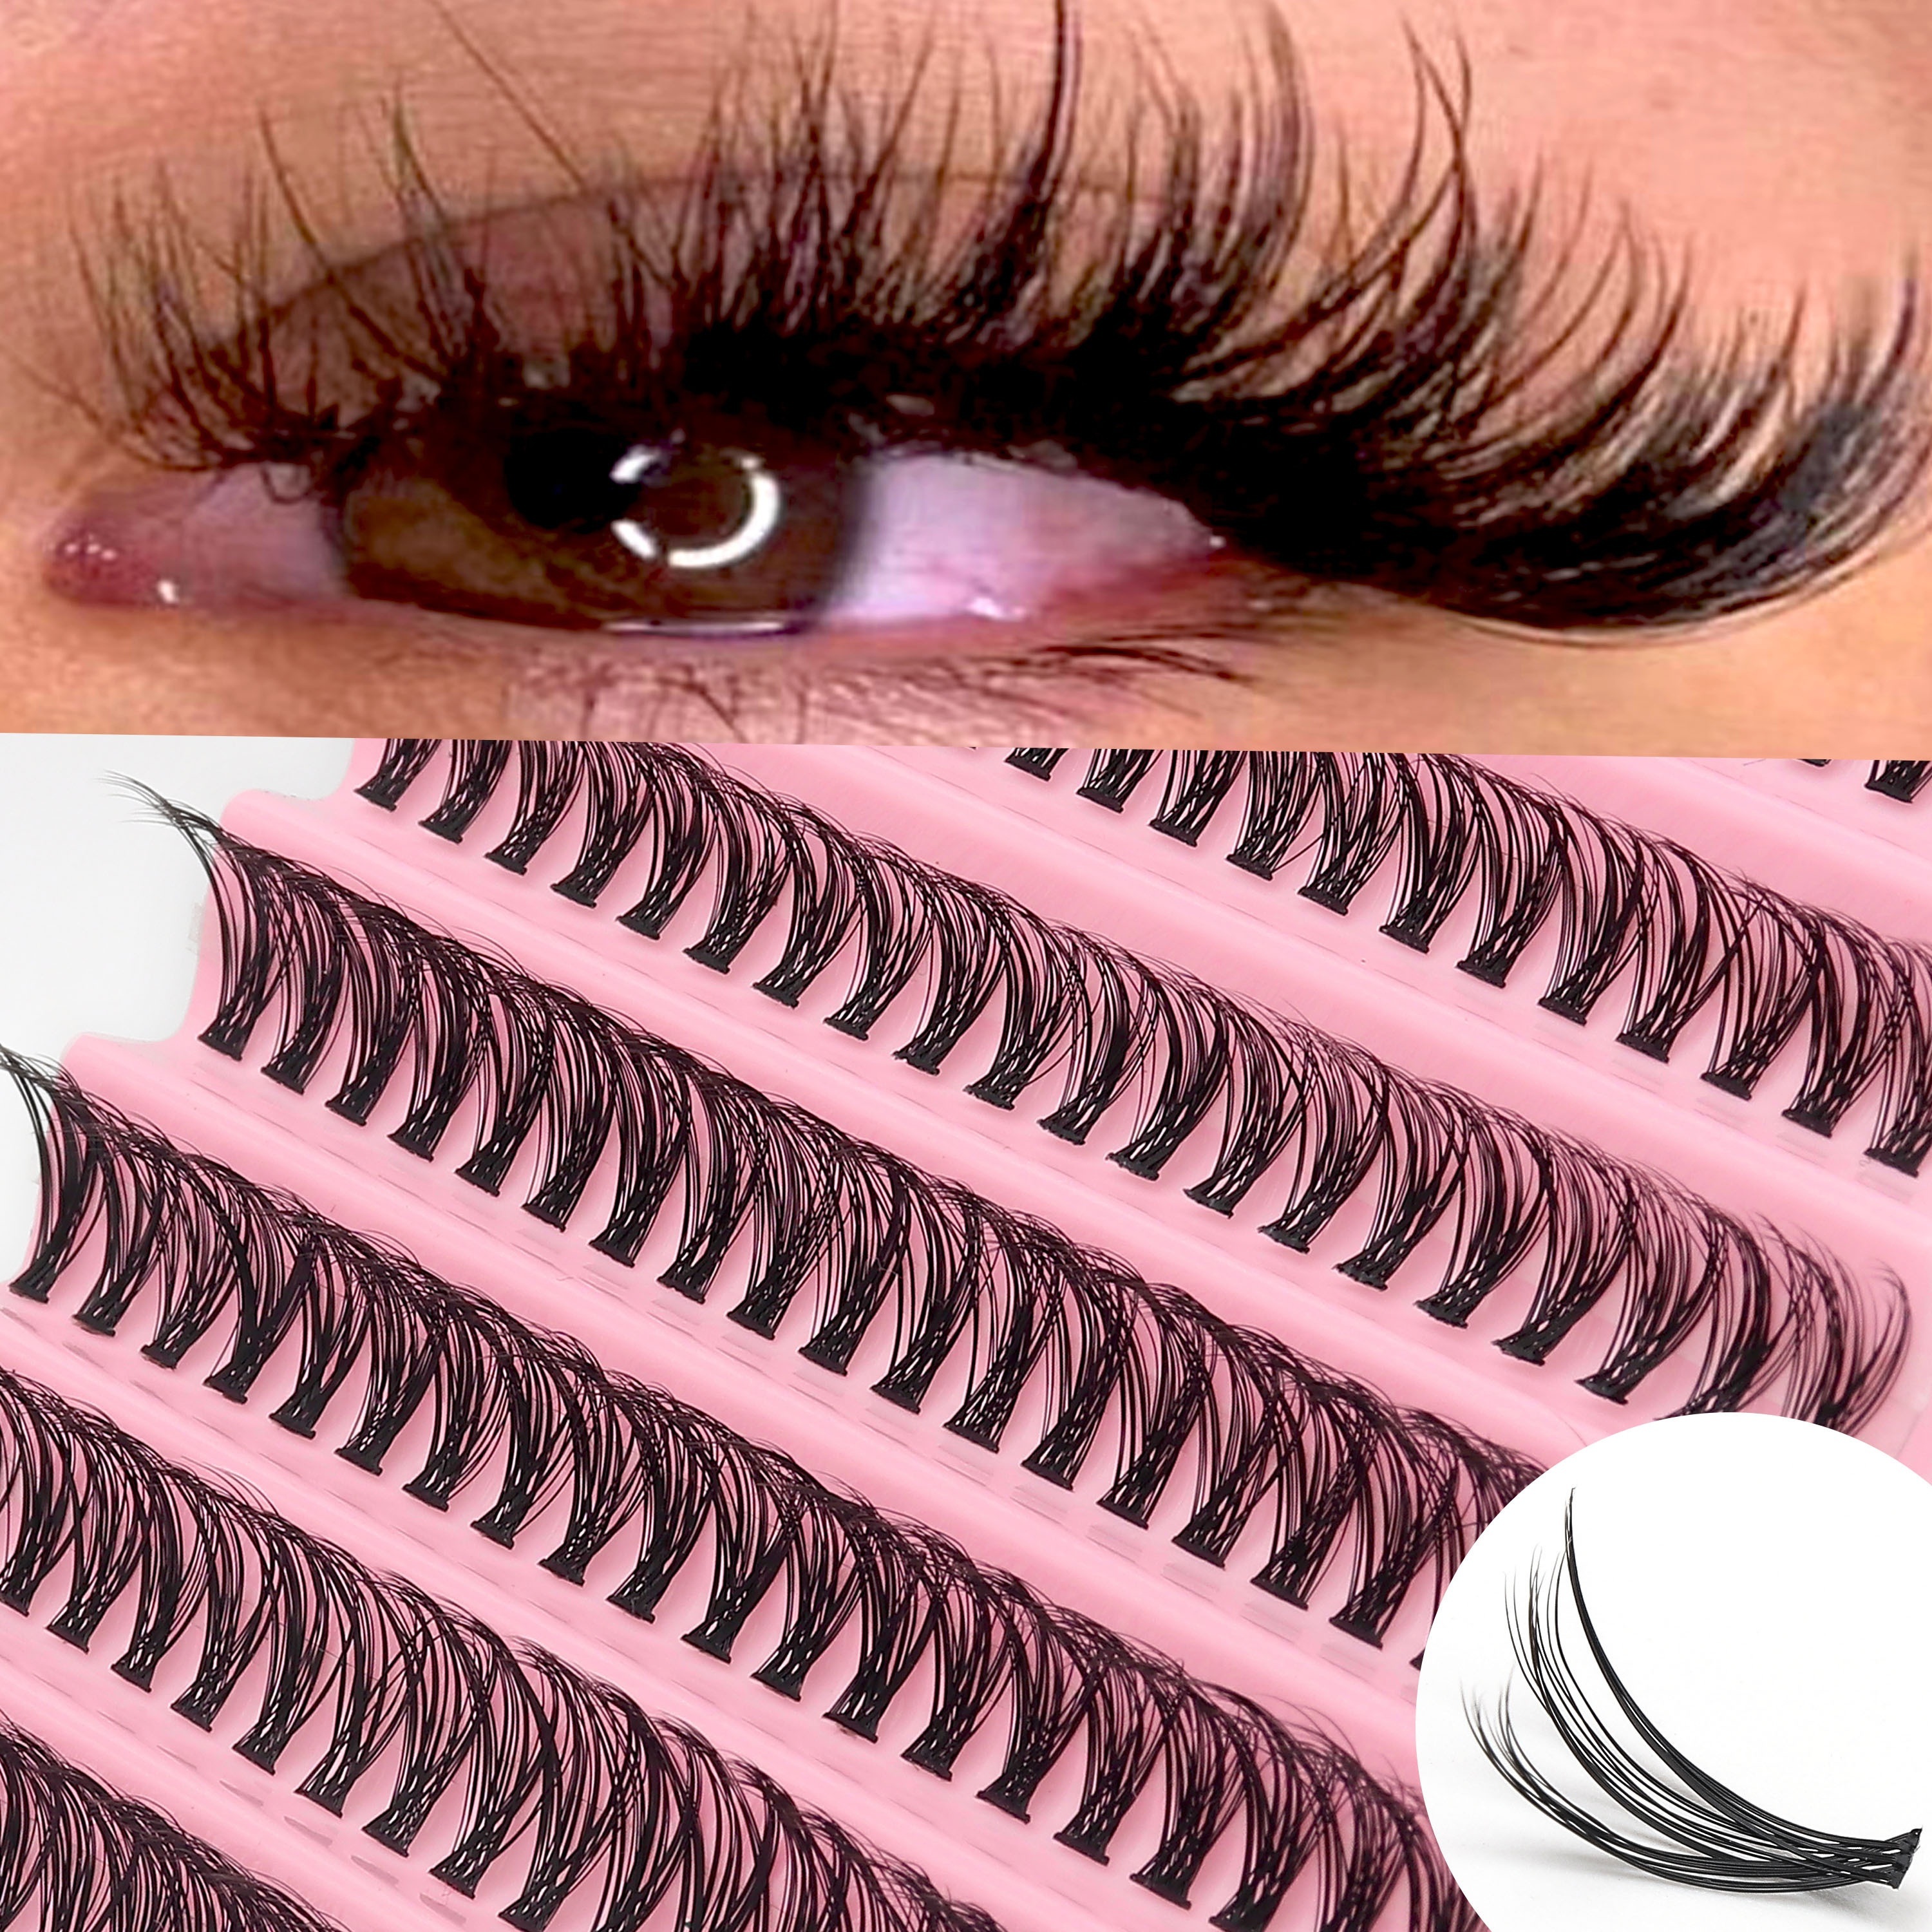 

200 Pieces Cluster False Eyelash Extensions Diy Kit, Ultra-thin 0.05mm D , Mixed Style Reusable Individual Lash Clusters For Beginners, Extra Thick Varieties 10mm-18mm With Adhesive And Sealant